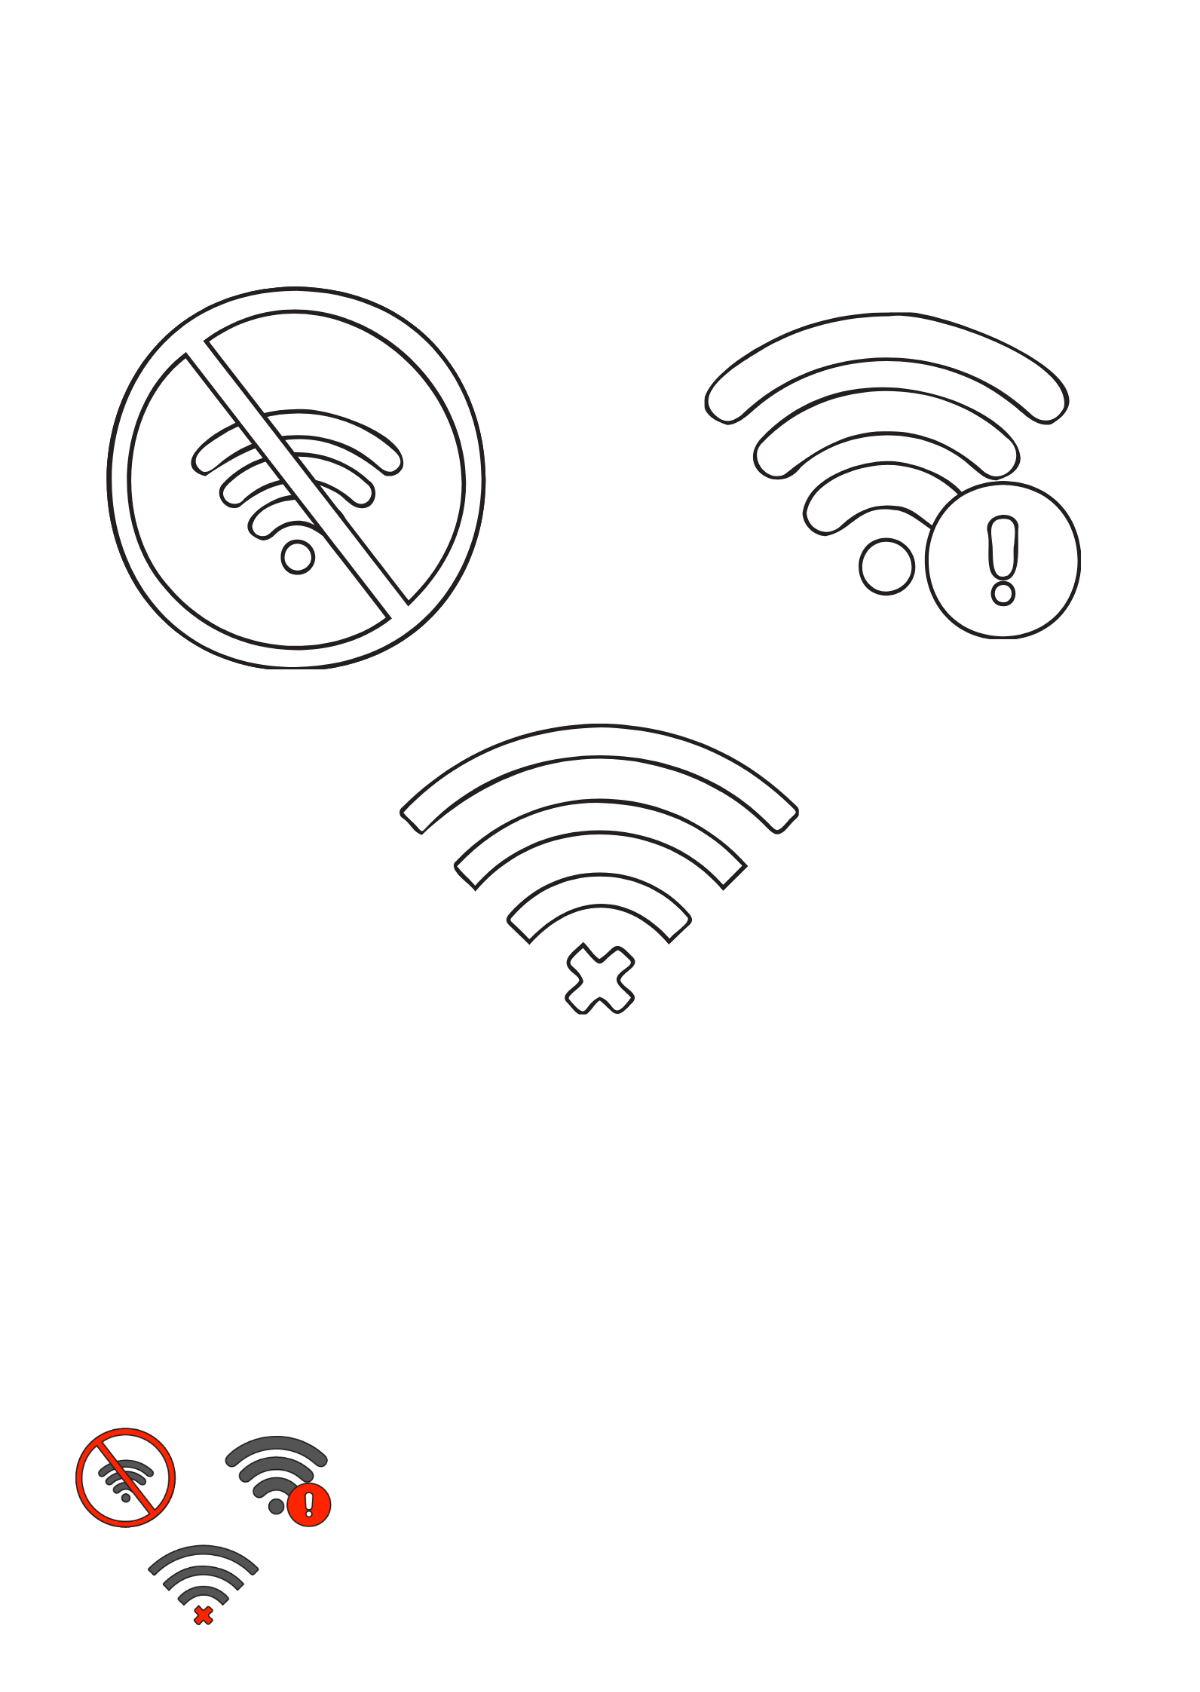 No Wifi Symbol coloring page Template